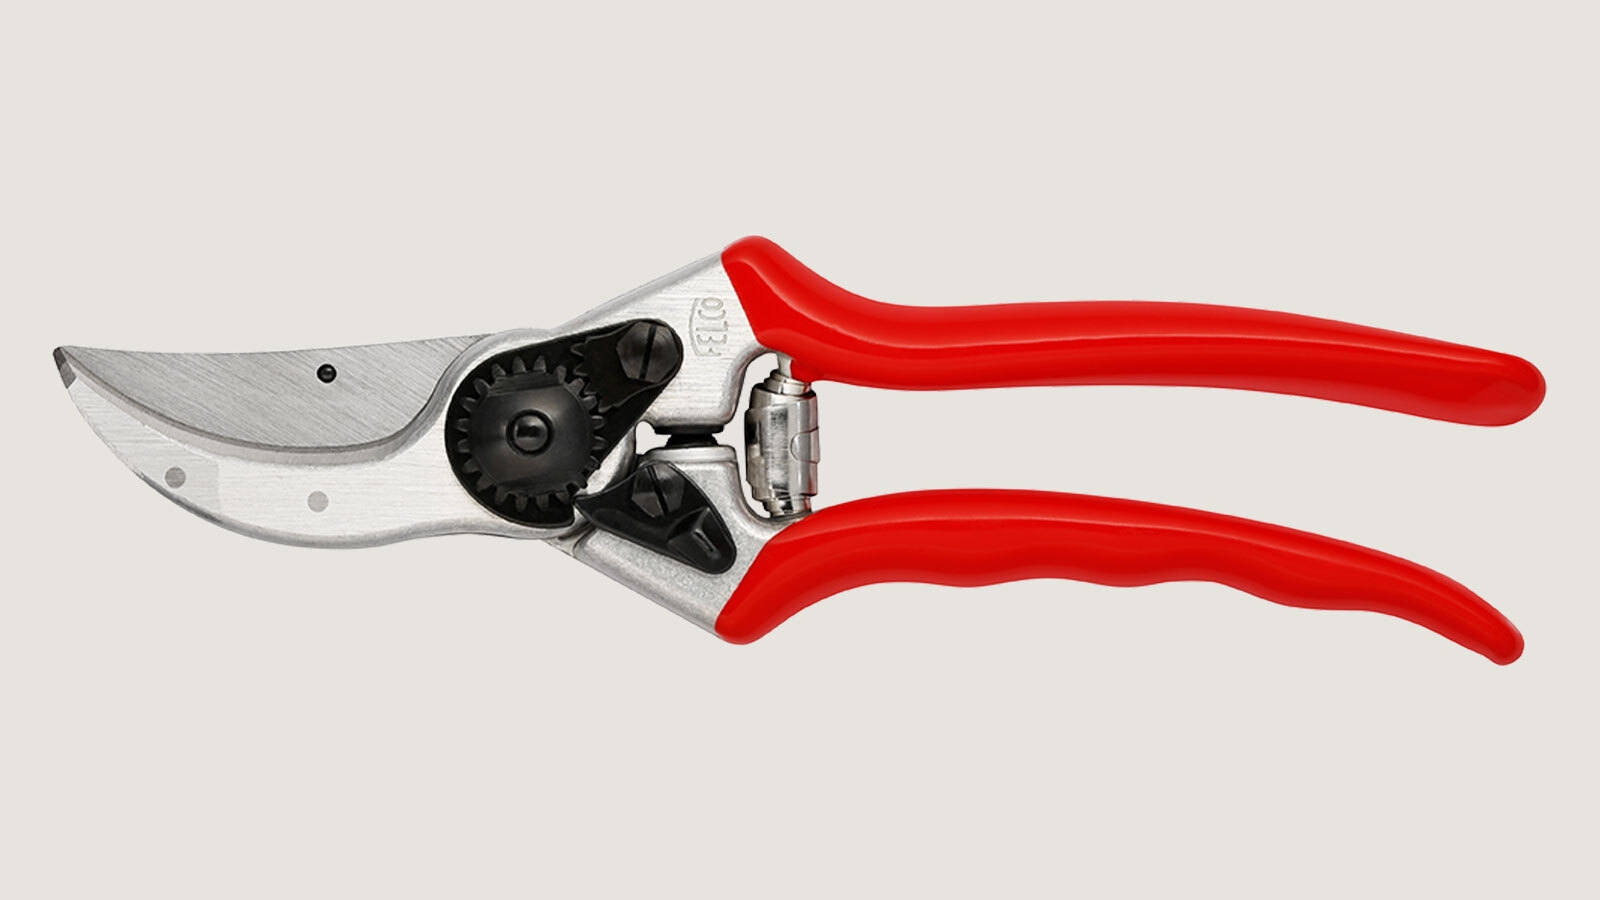 Images of a FELCO tool with red handles.